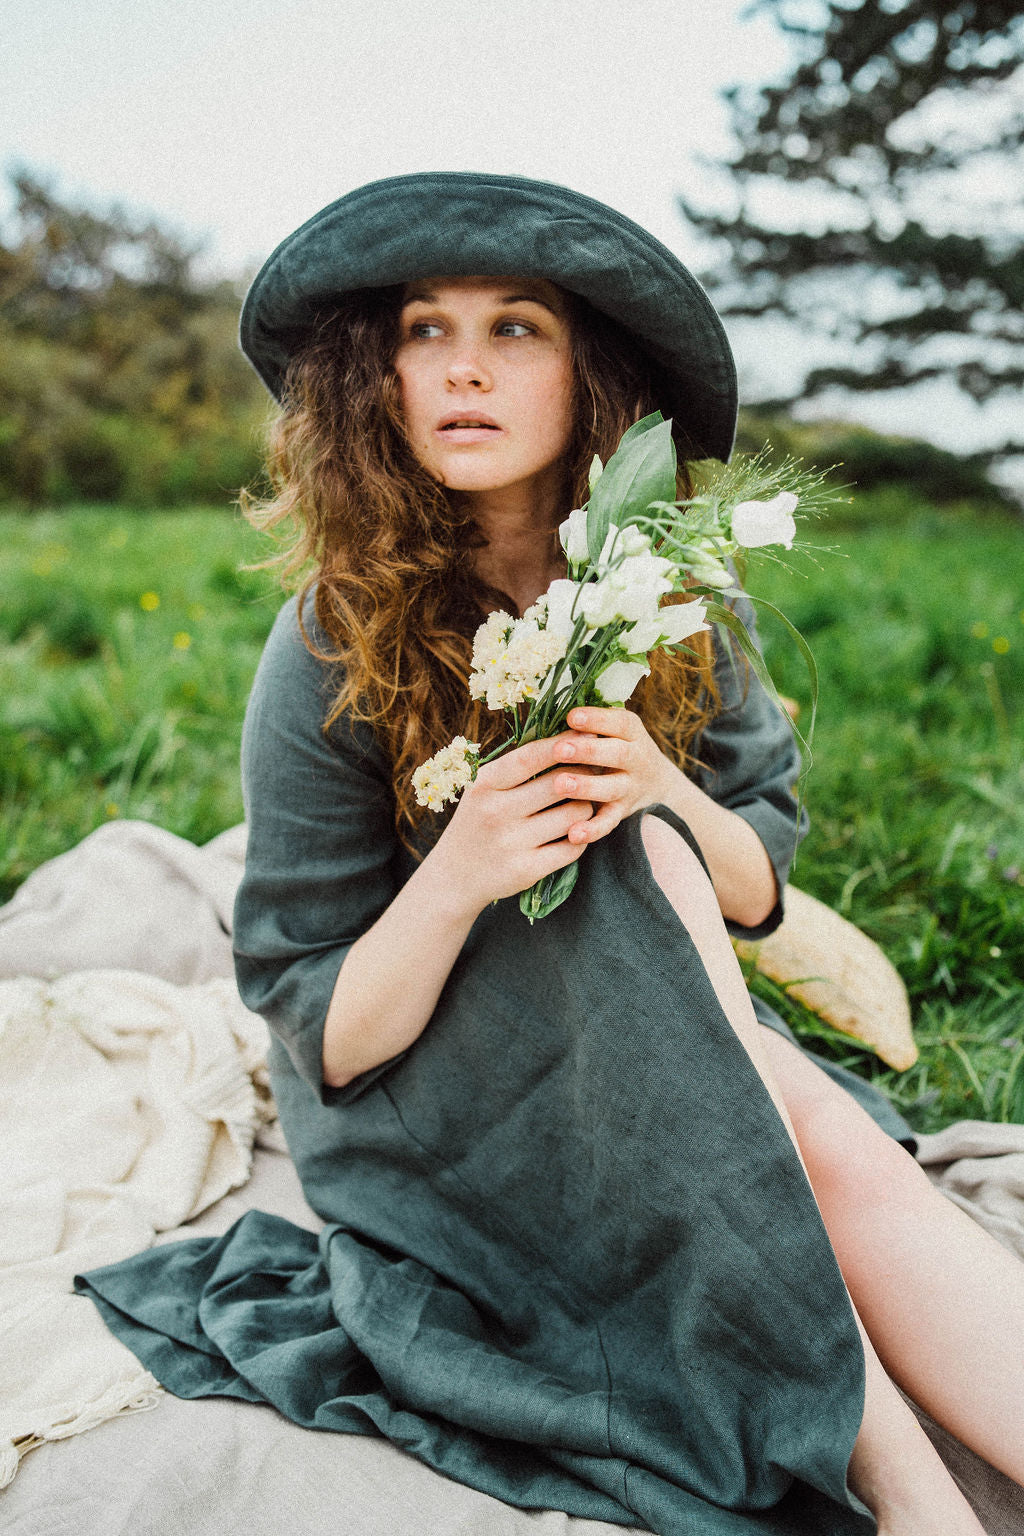 Solpardus picnic in Mawnan Smith Cornwall wearing Delphi linen dress and Nyx linen hat. Holding wild flowers. All natural ethical sustainable linen clothing perfect for sensitive skin psoriasis and eczema 